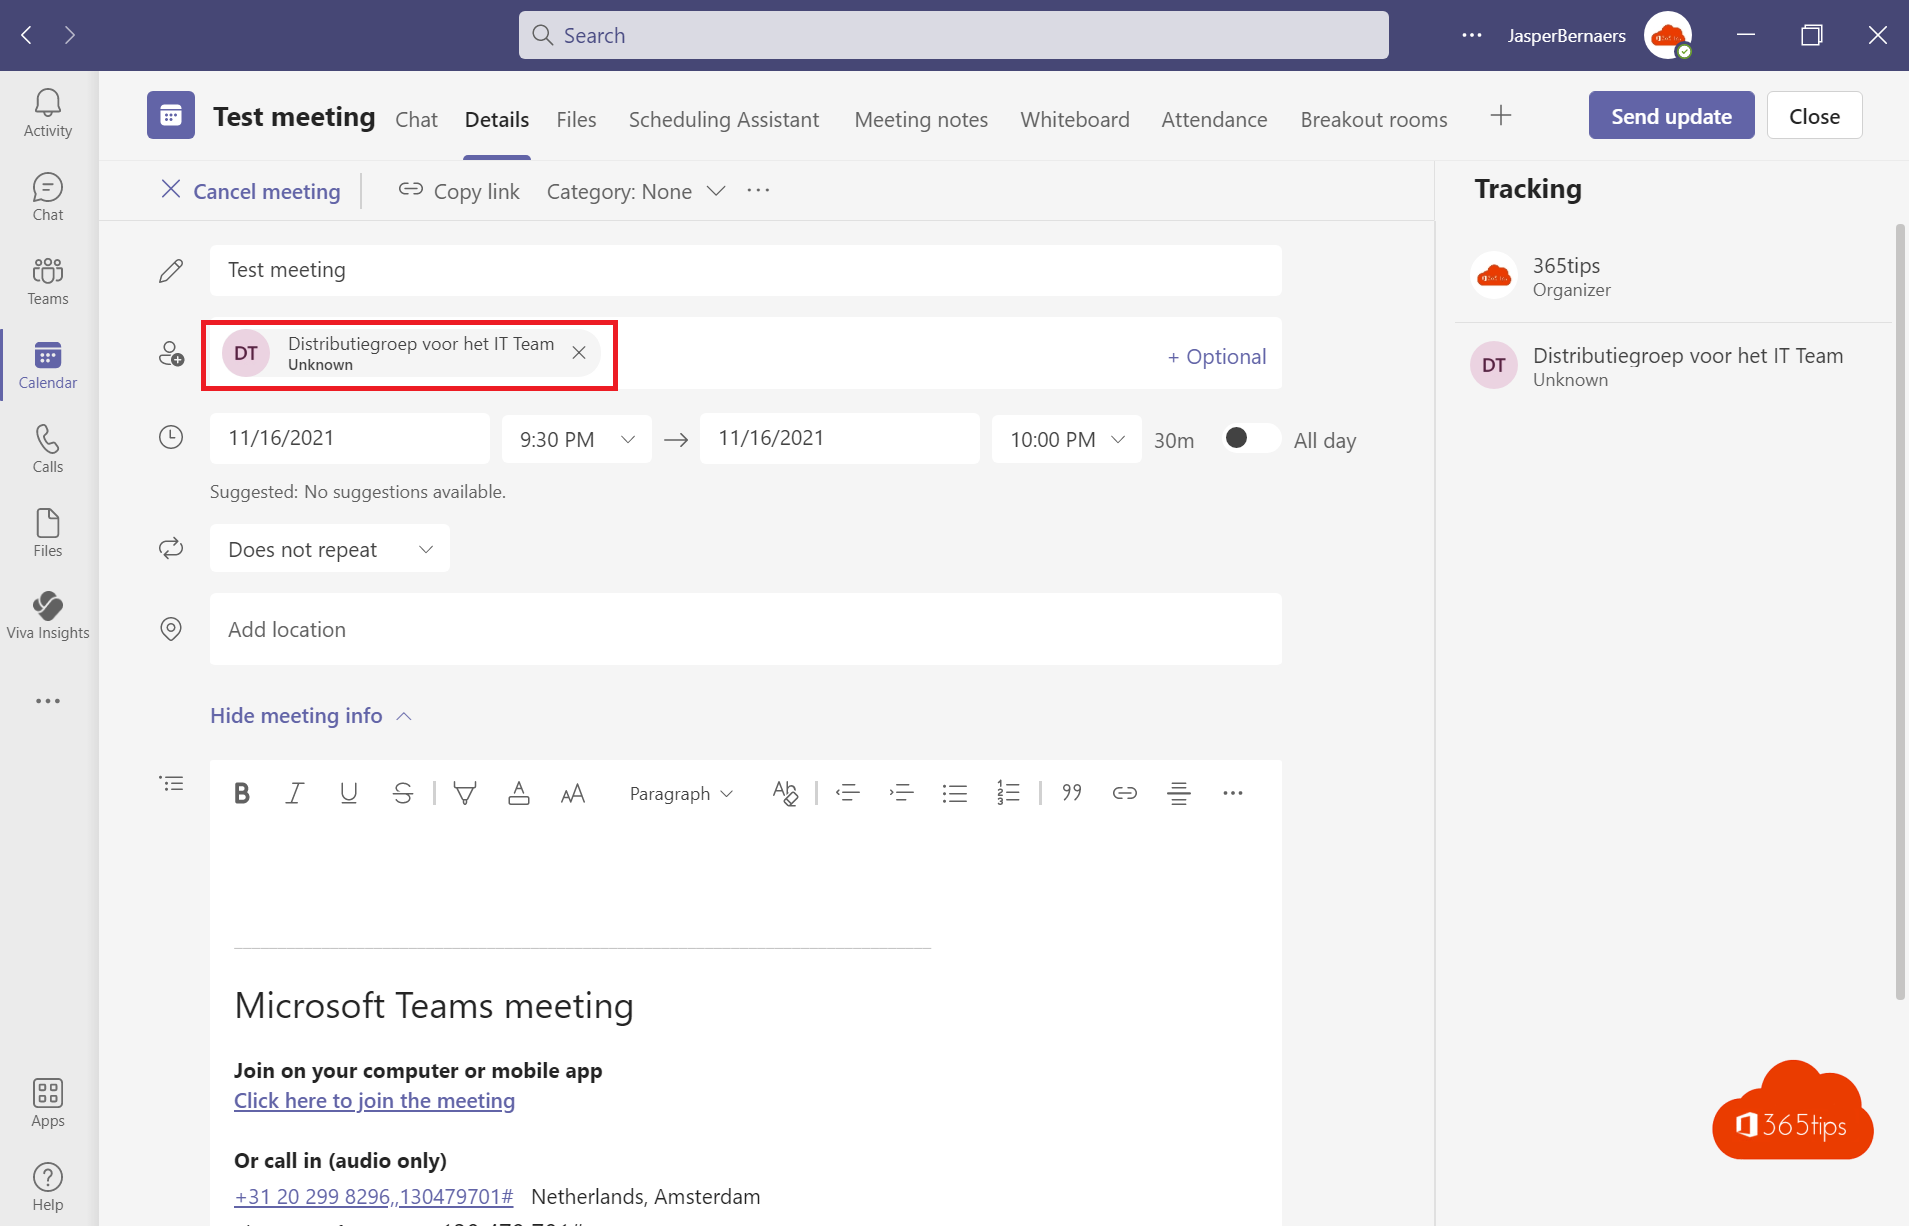 📝 How to add a distribution list or Office 365 group to your Teams meeting?